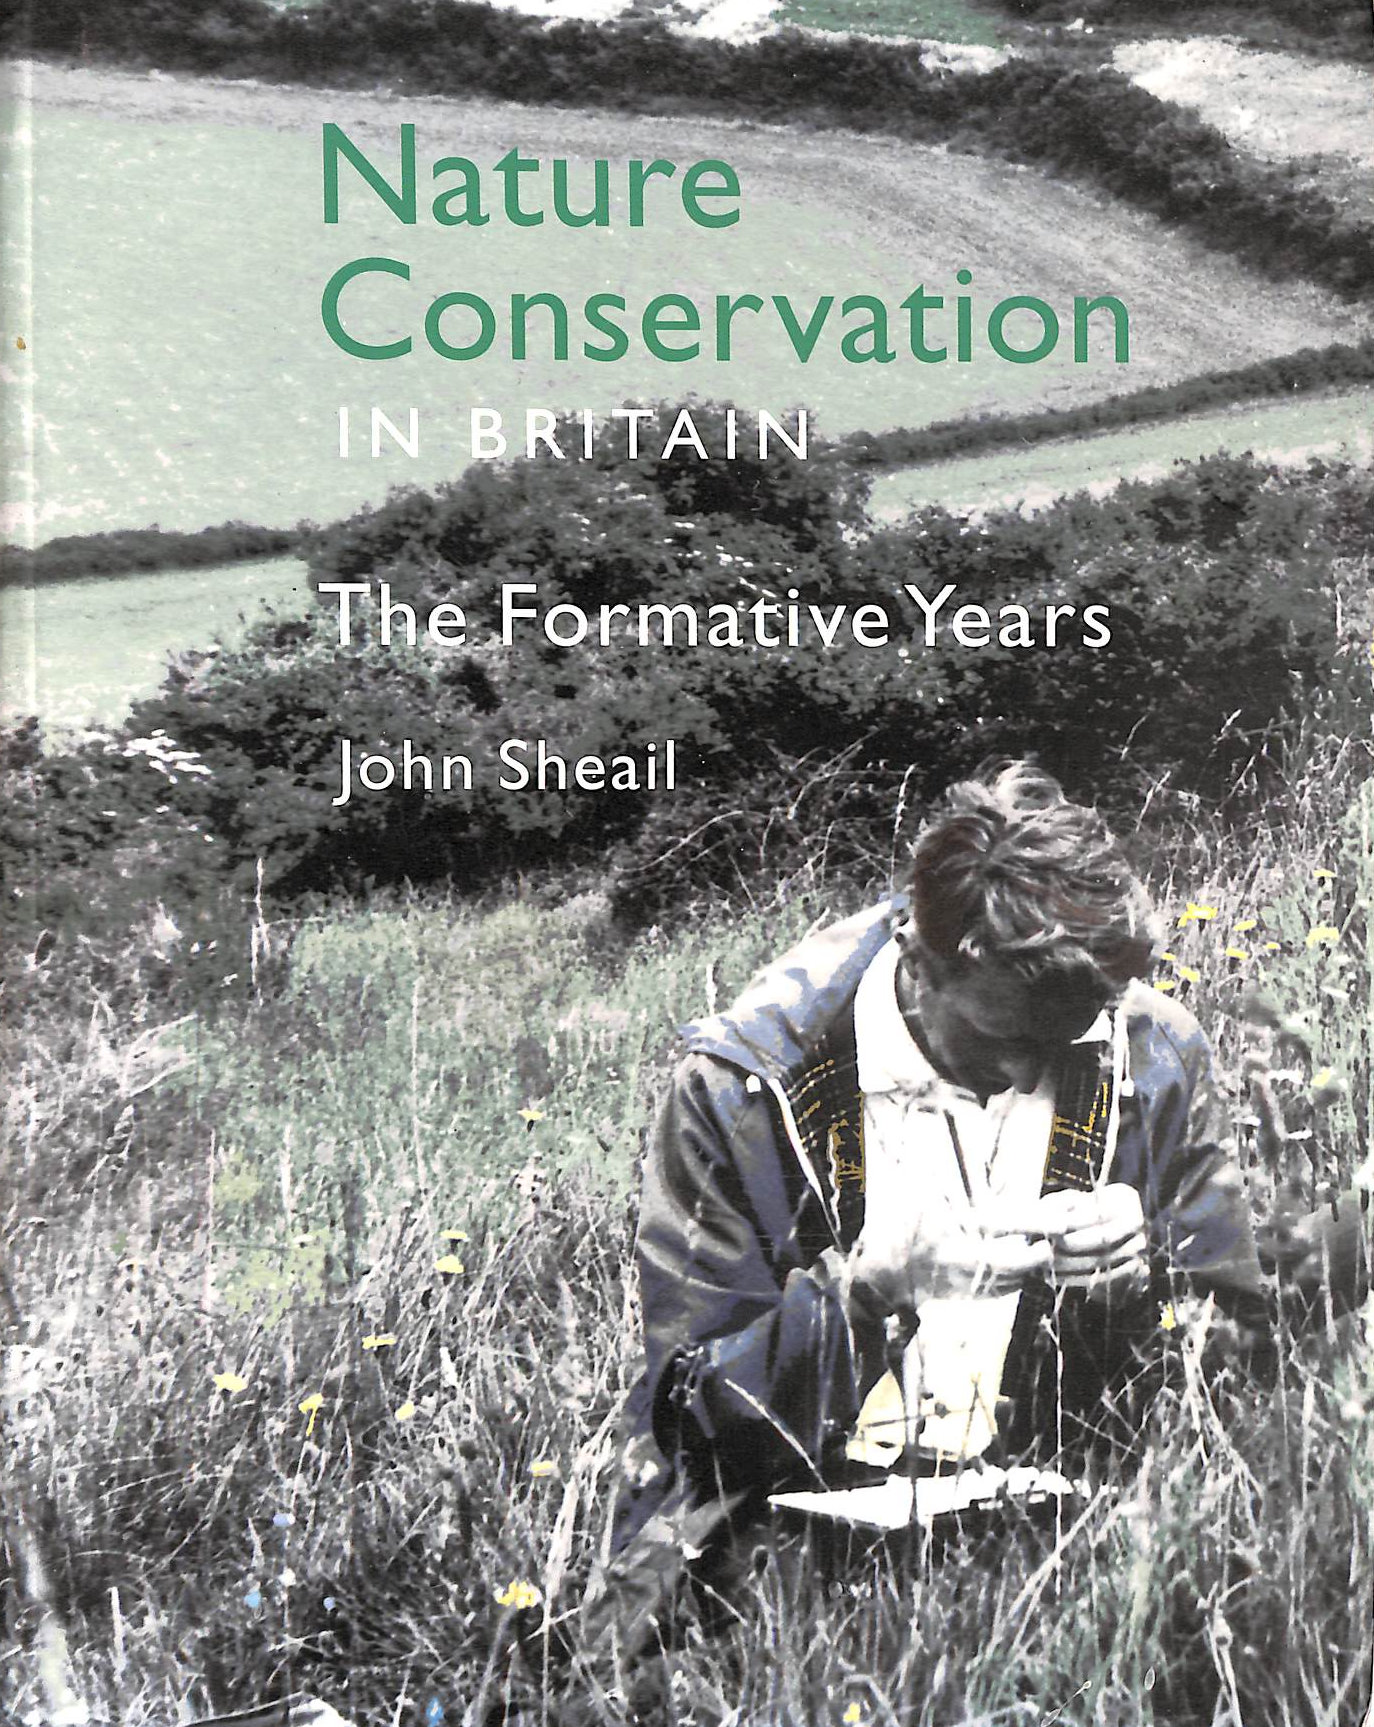 SHEAIL, JOHN - Nature Conservation in Britain: The Formative Years